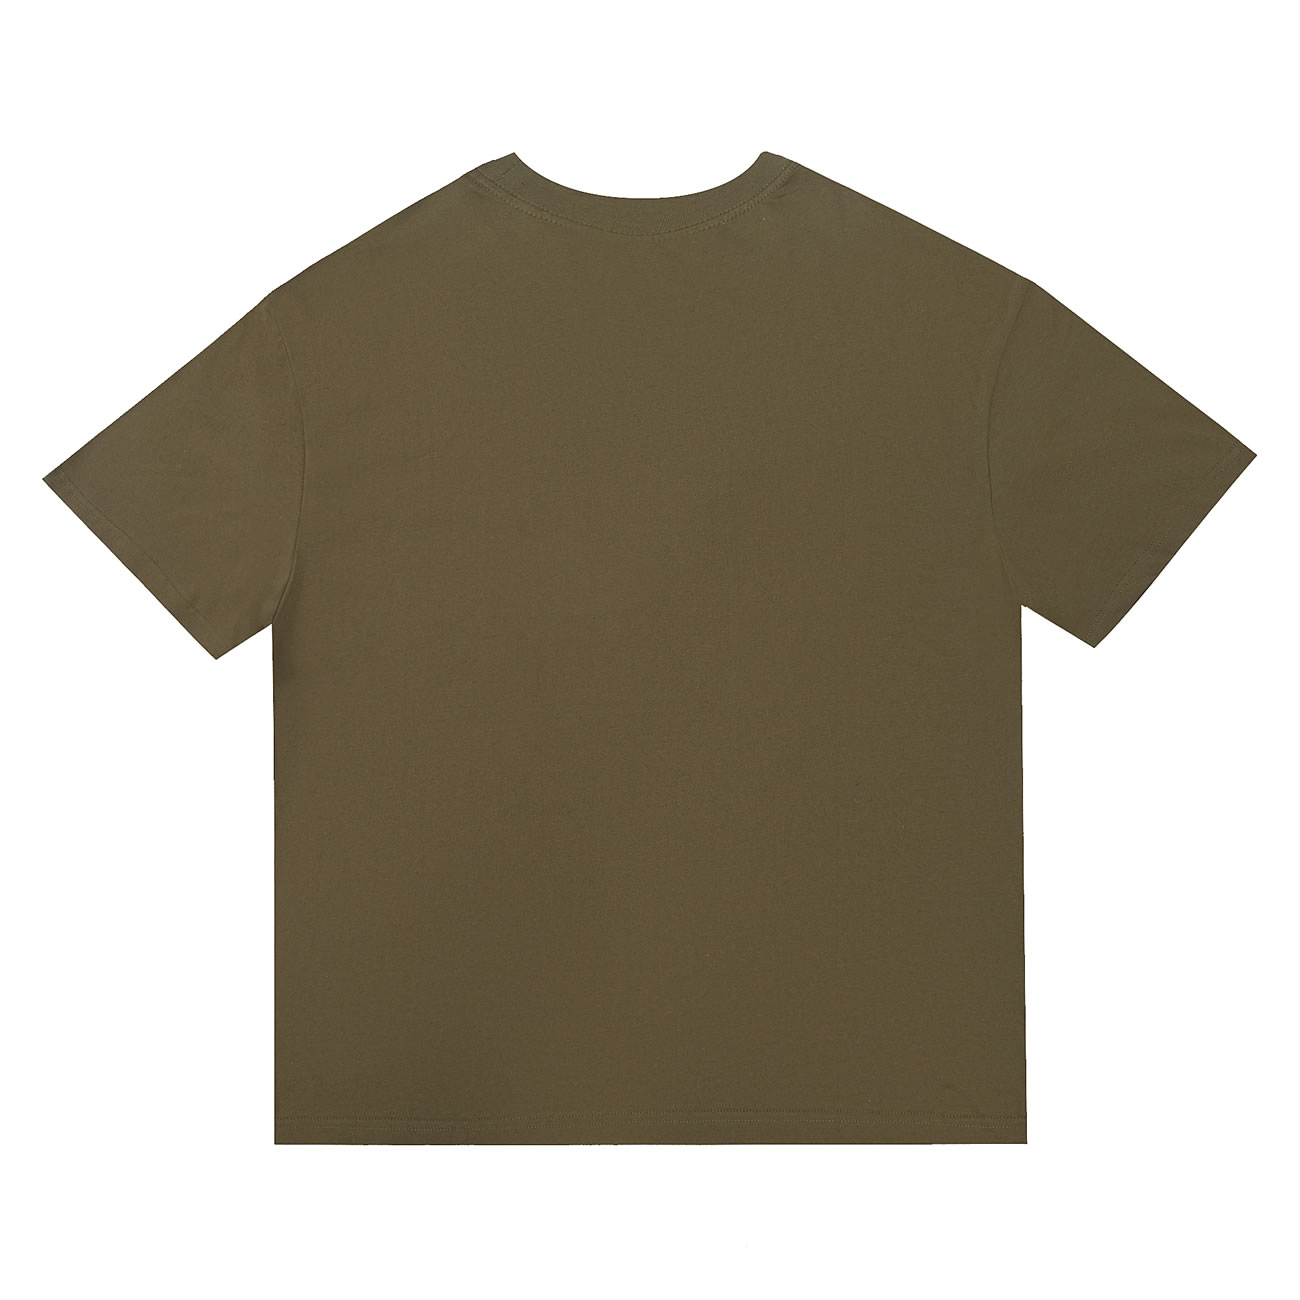 Kanye New T Shirts For Sale Brown (2) - newkick.org